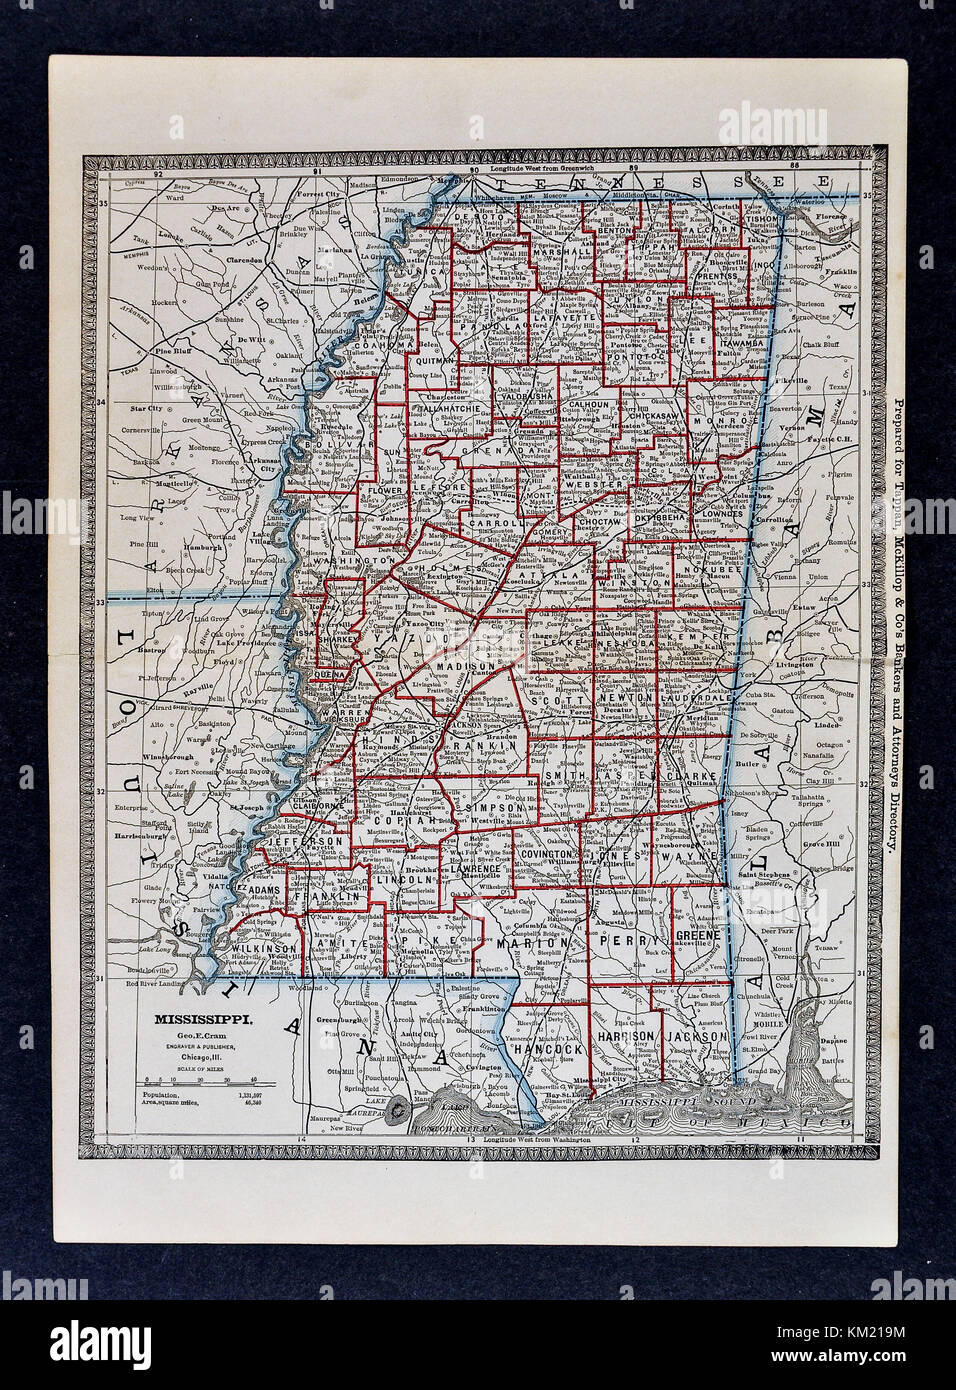 George Cram Antique Map from 1866 Atlas for Attorneys and Bankers: United States - Mississippi - Jackson Vicksburg Biloxi Natchez Stock Photo